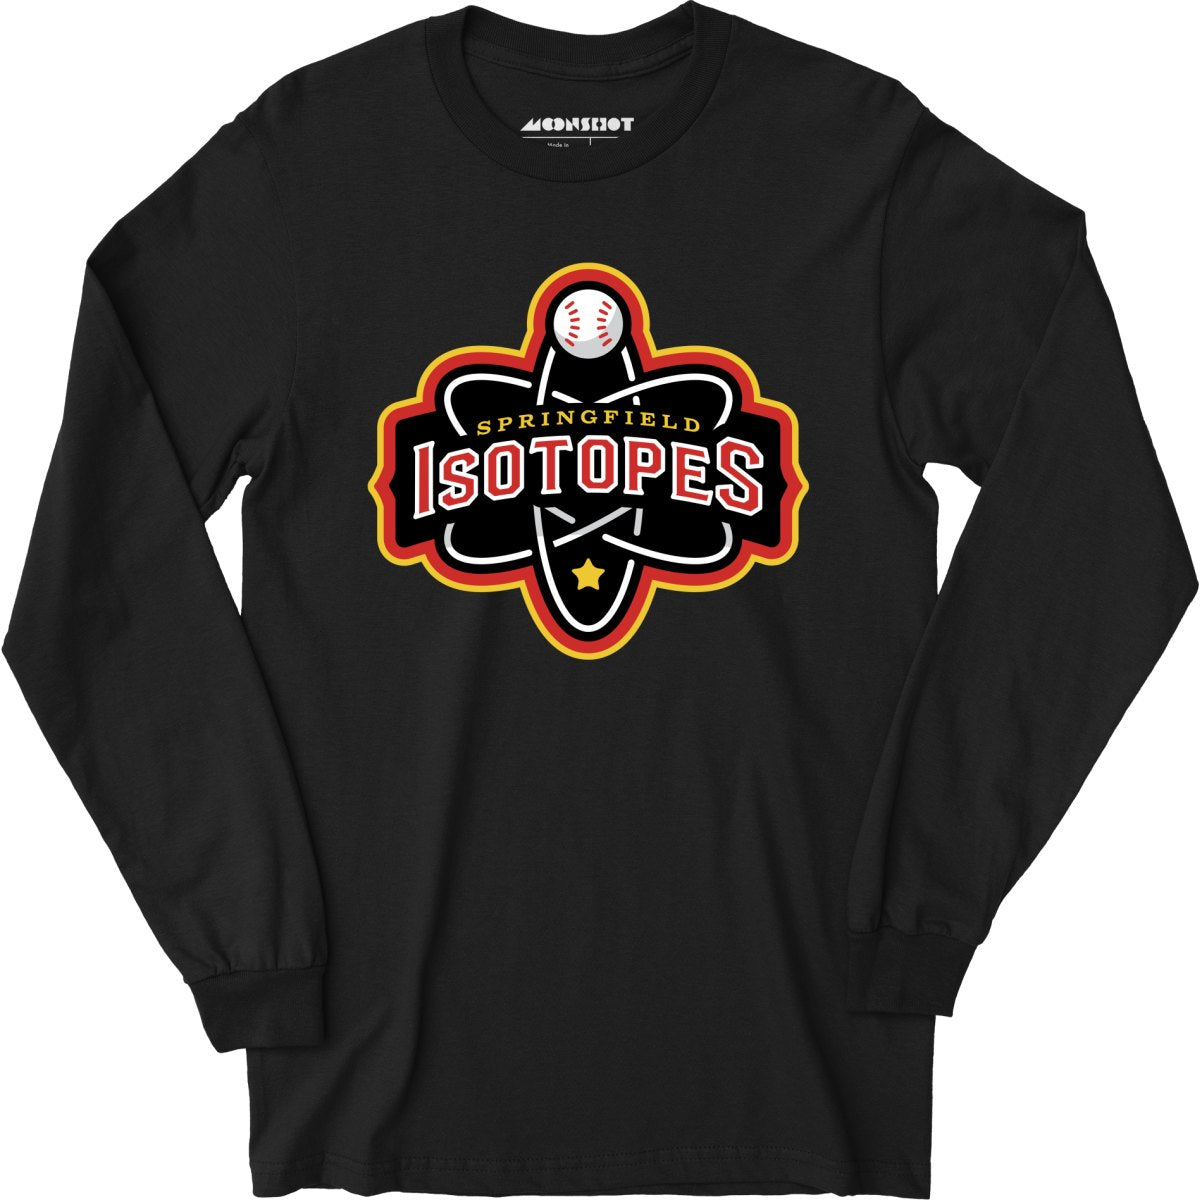 Springfield Isotopes - Long Sleeve T-Shirt